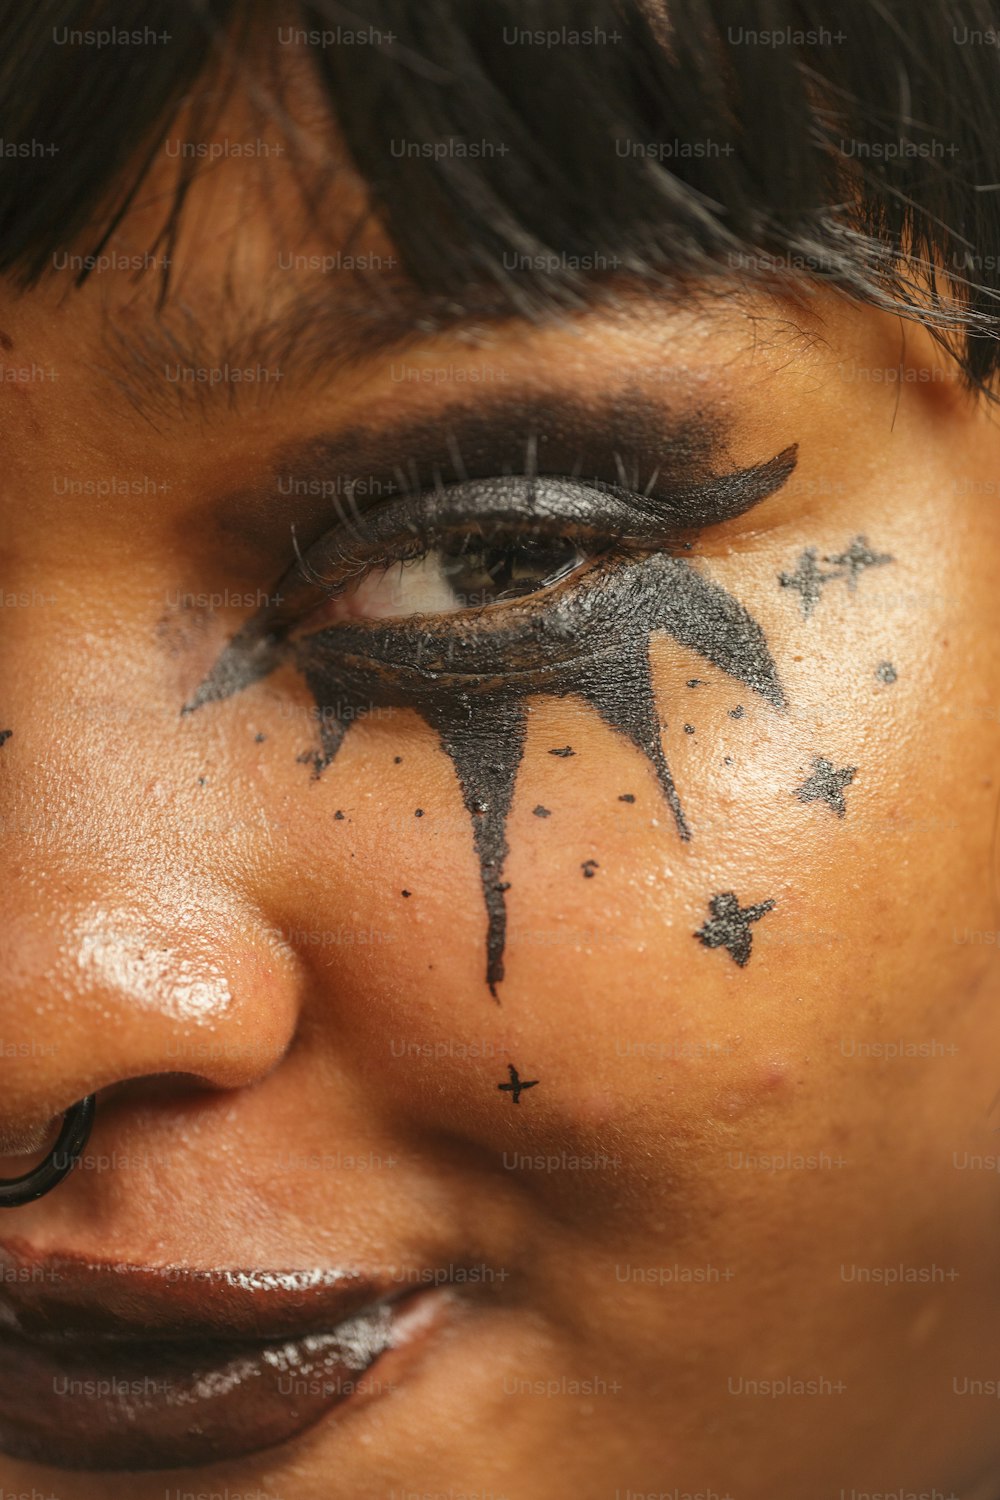 a close up of a person with black makeup